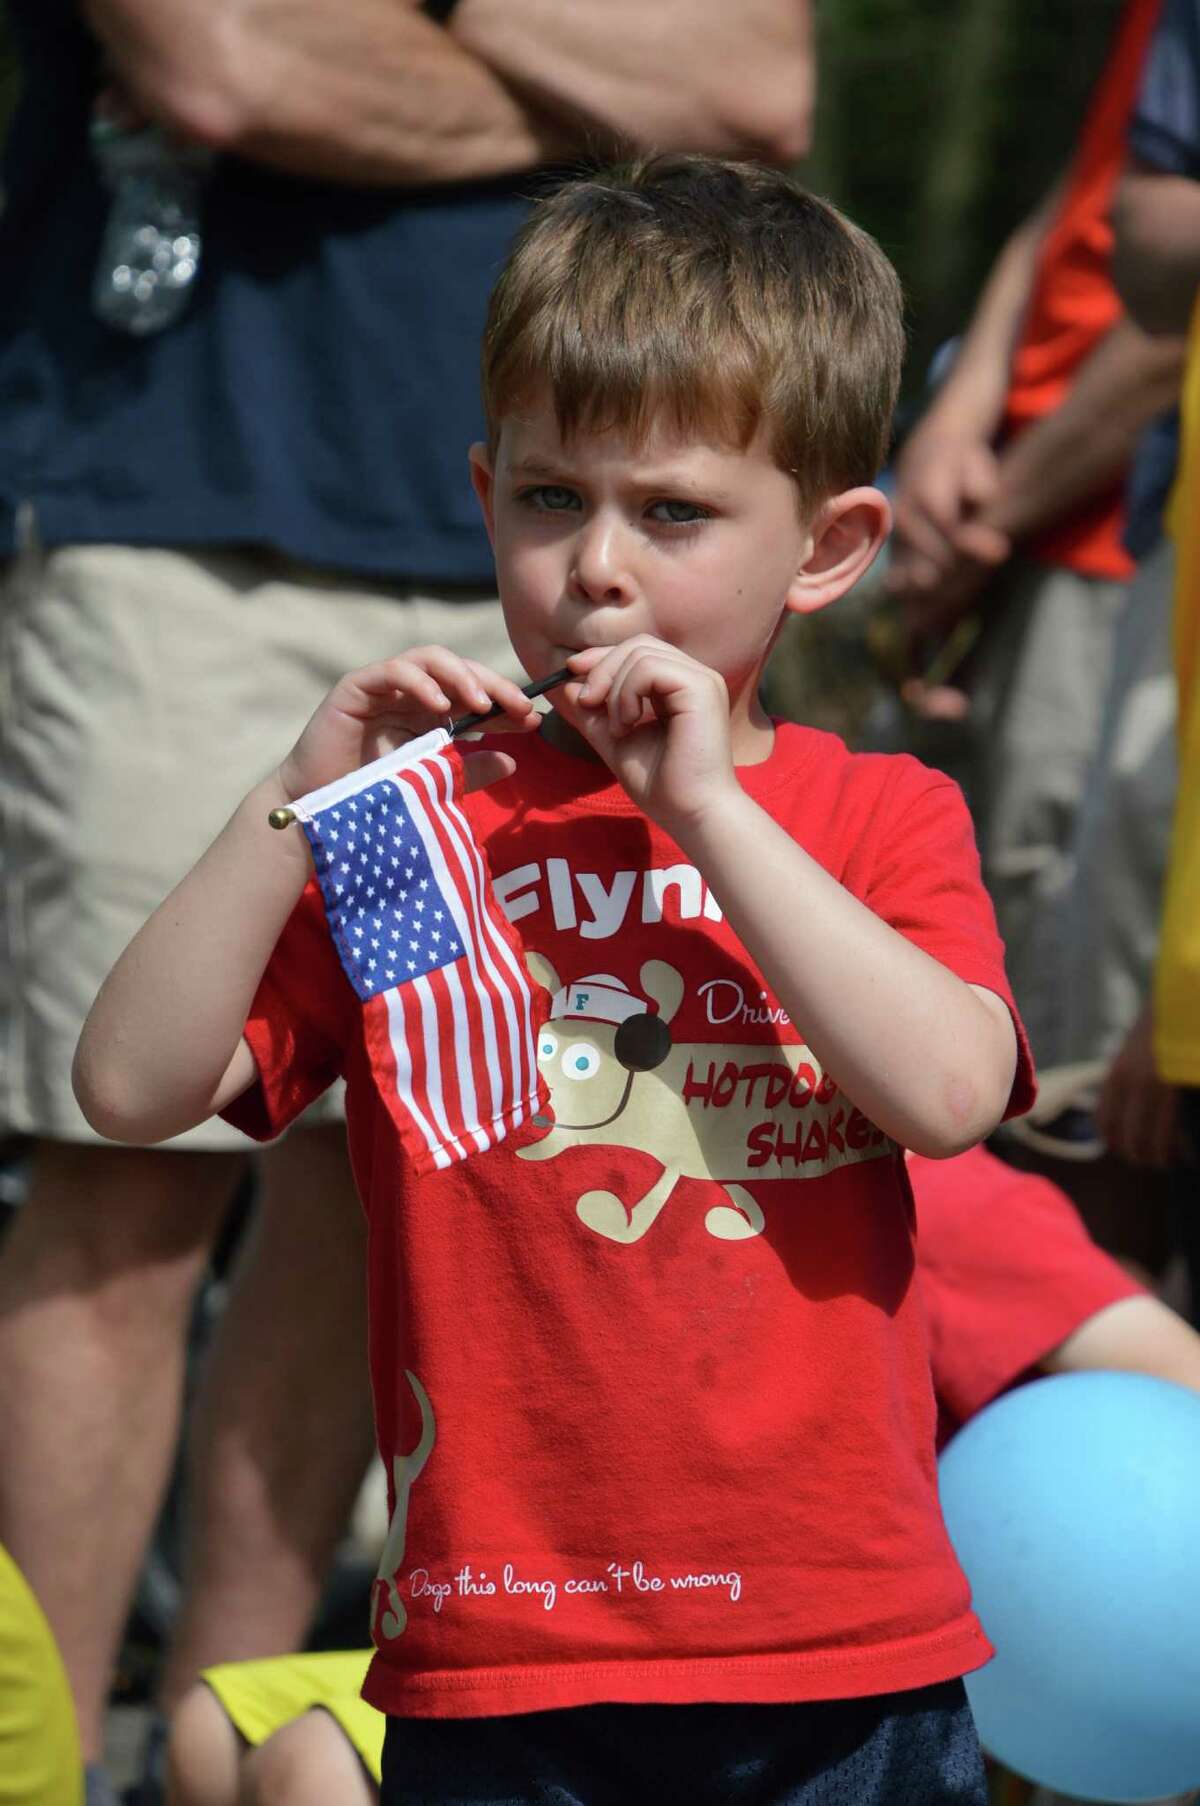 On Memorial Day, Westport steps lively in tribute to the nation's fallen